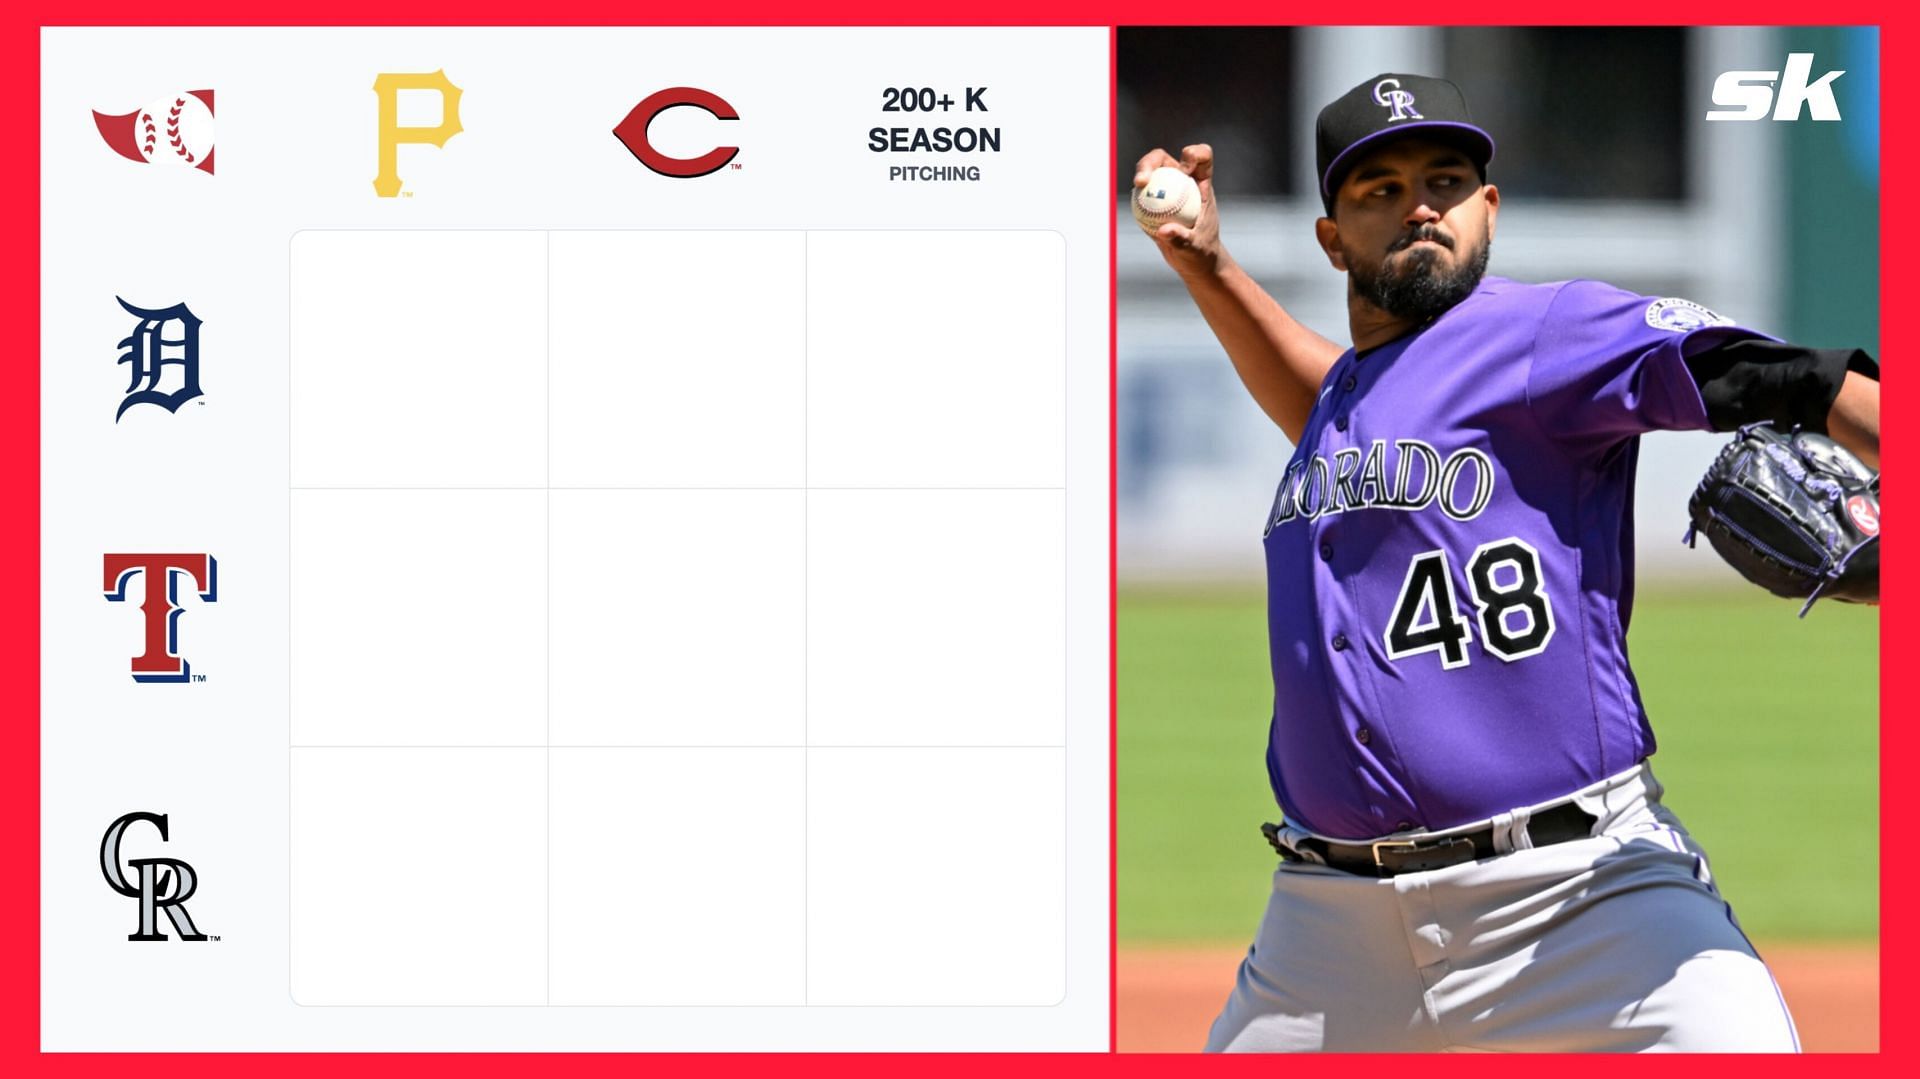 Colorado Rockies player to have recorded 200+ K pitching seasons